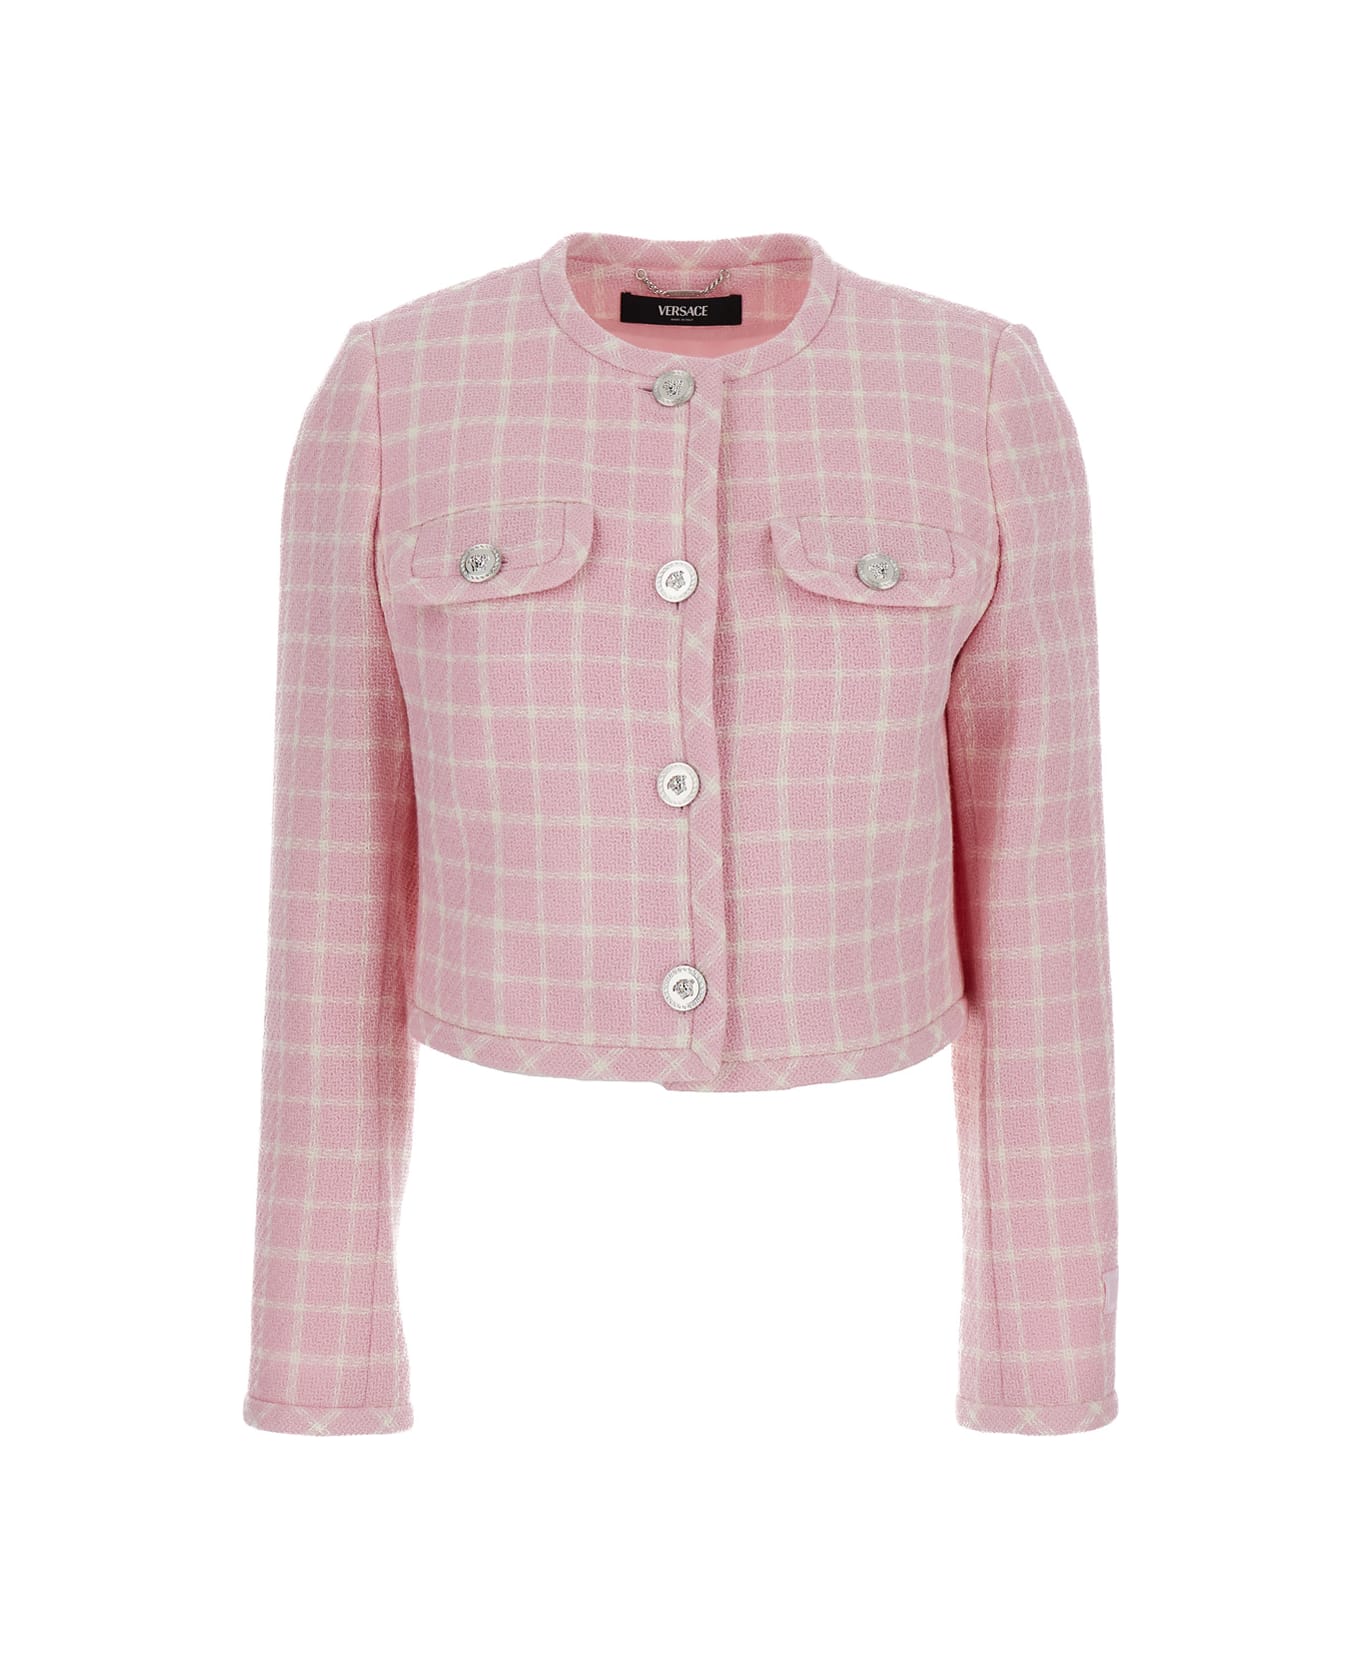 Versace Pink Checked Tweed Jacket With Medusa Head Buttons In Wool Blend Woman - Pink